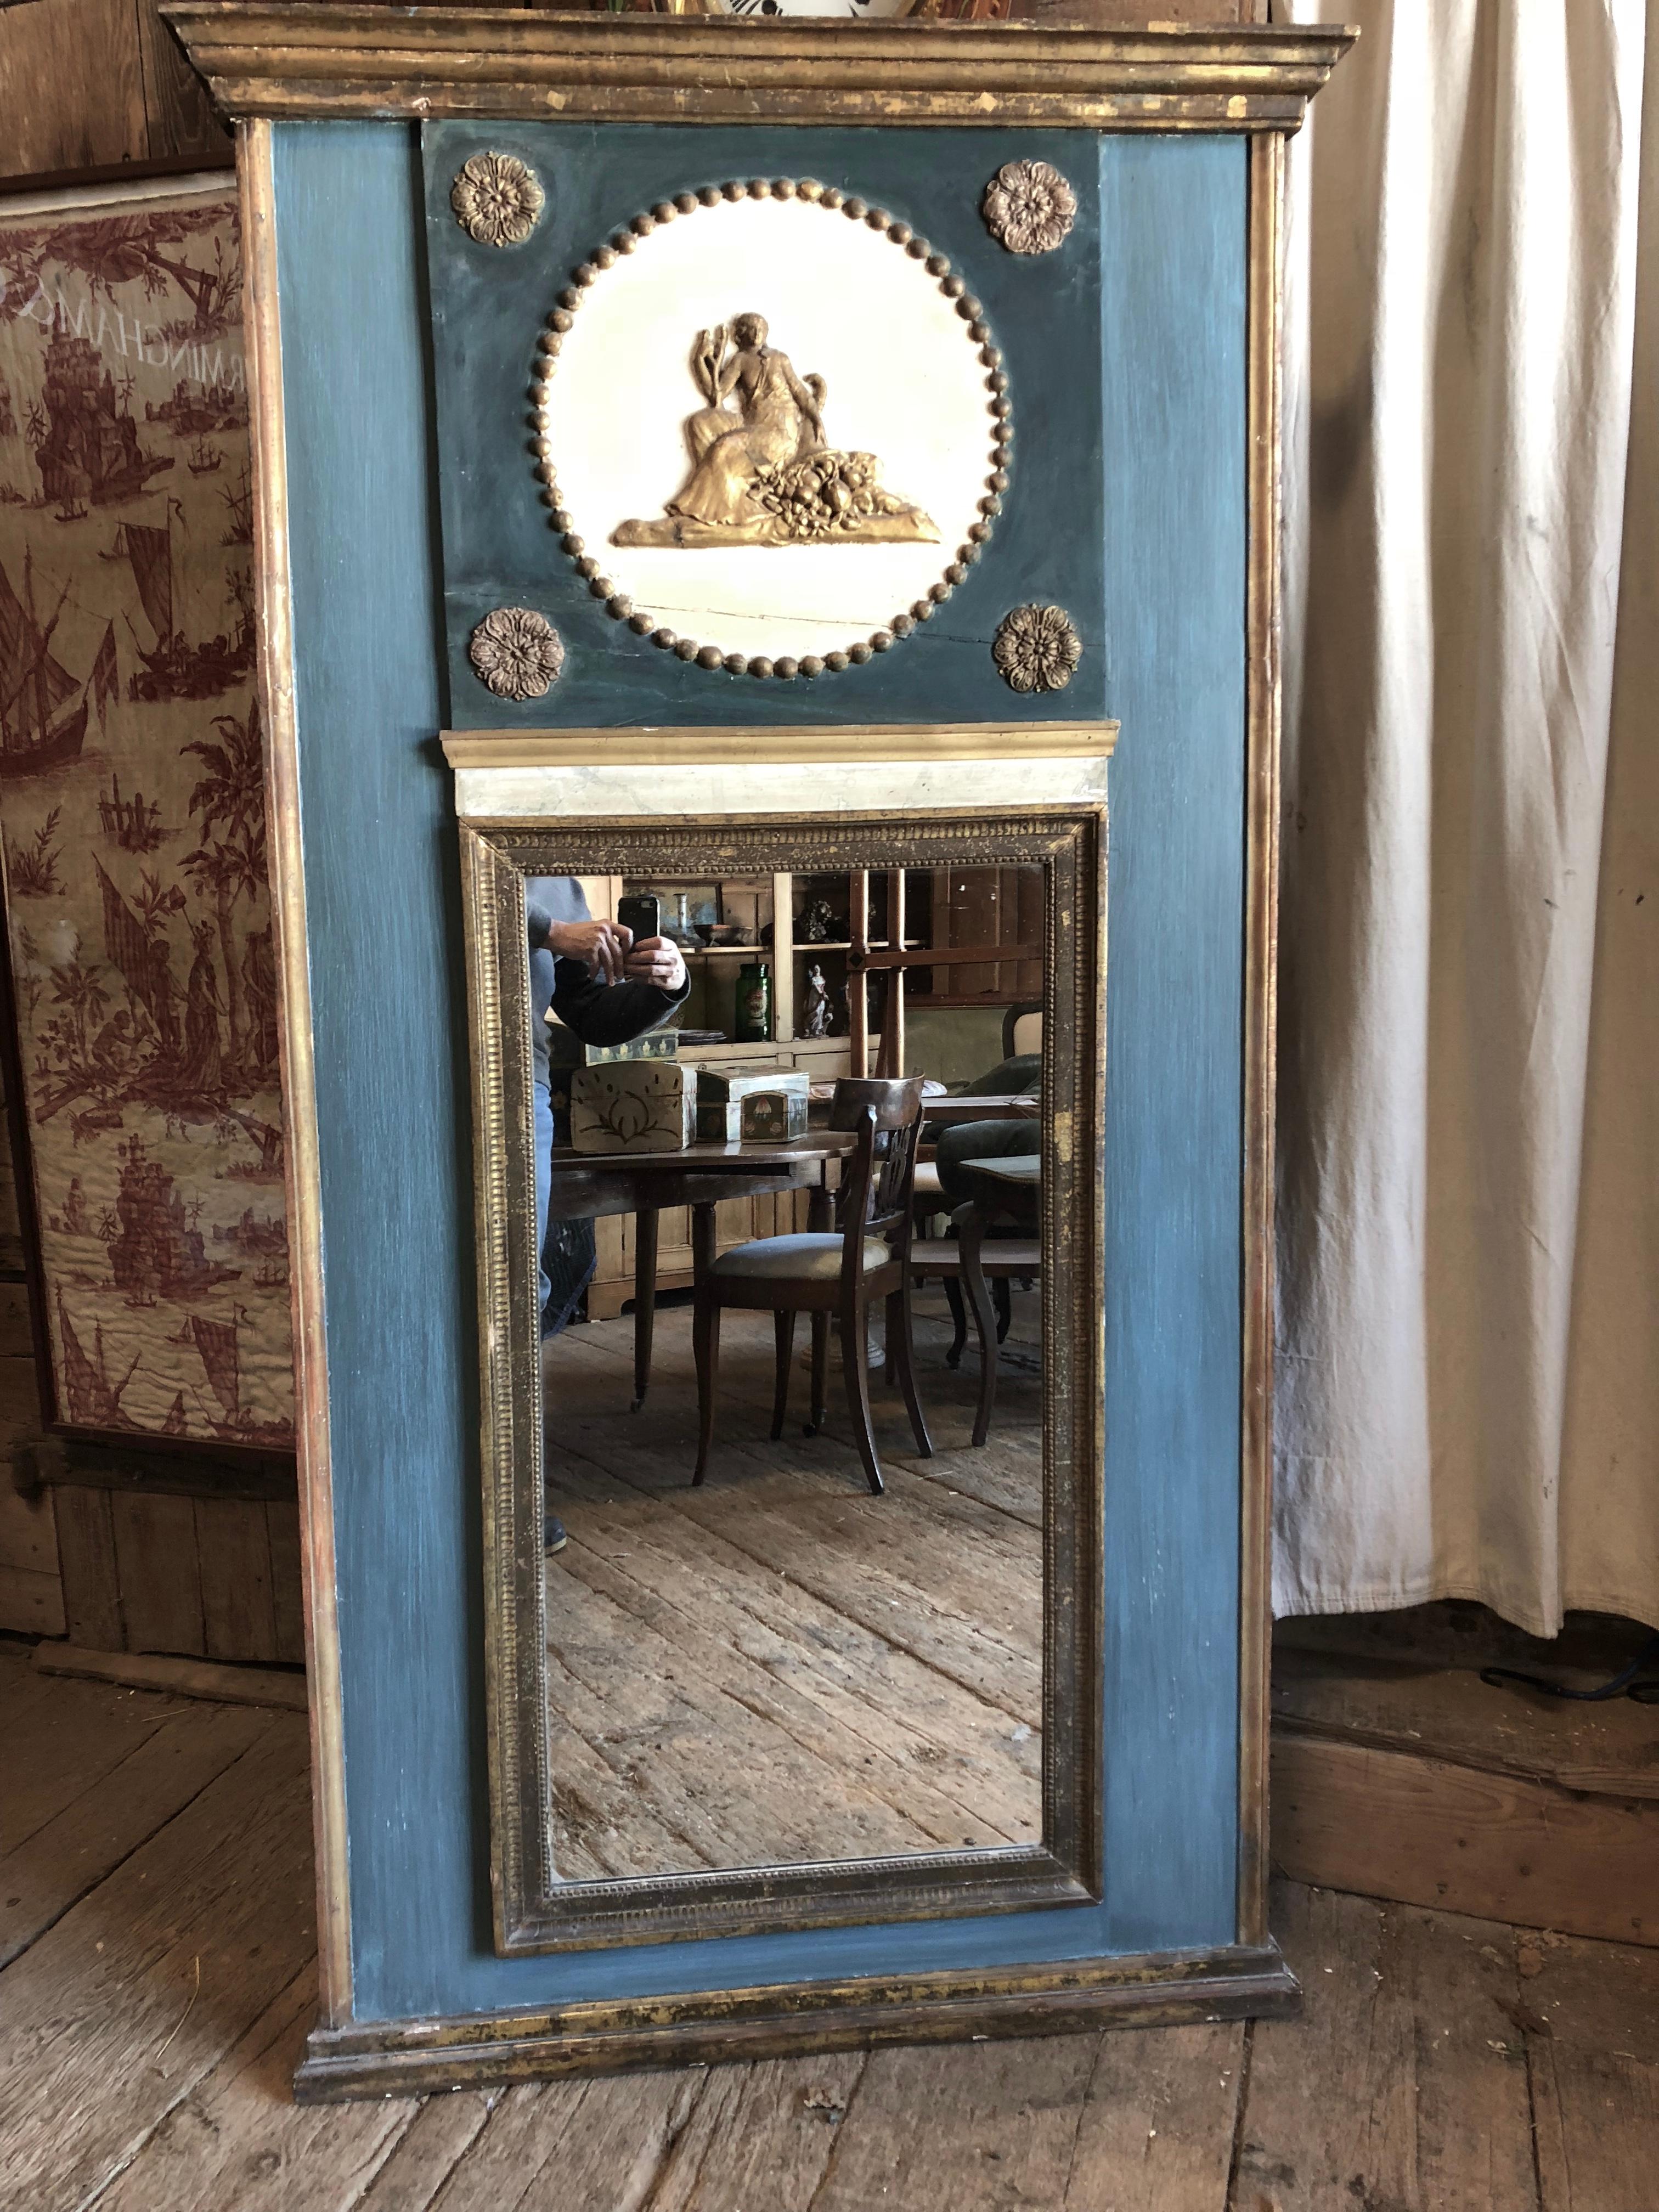 A neoclassical French trumeau mirror, circa 1780, in green, blue and cream painted finish with gilded decoration. Louis XVI period. Original glass plate.

  